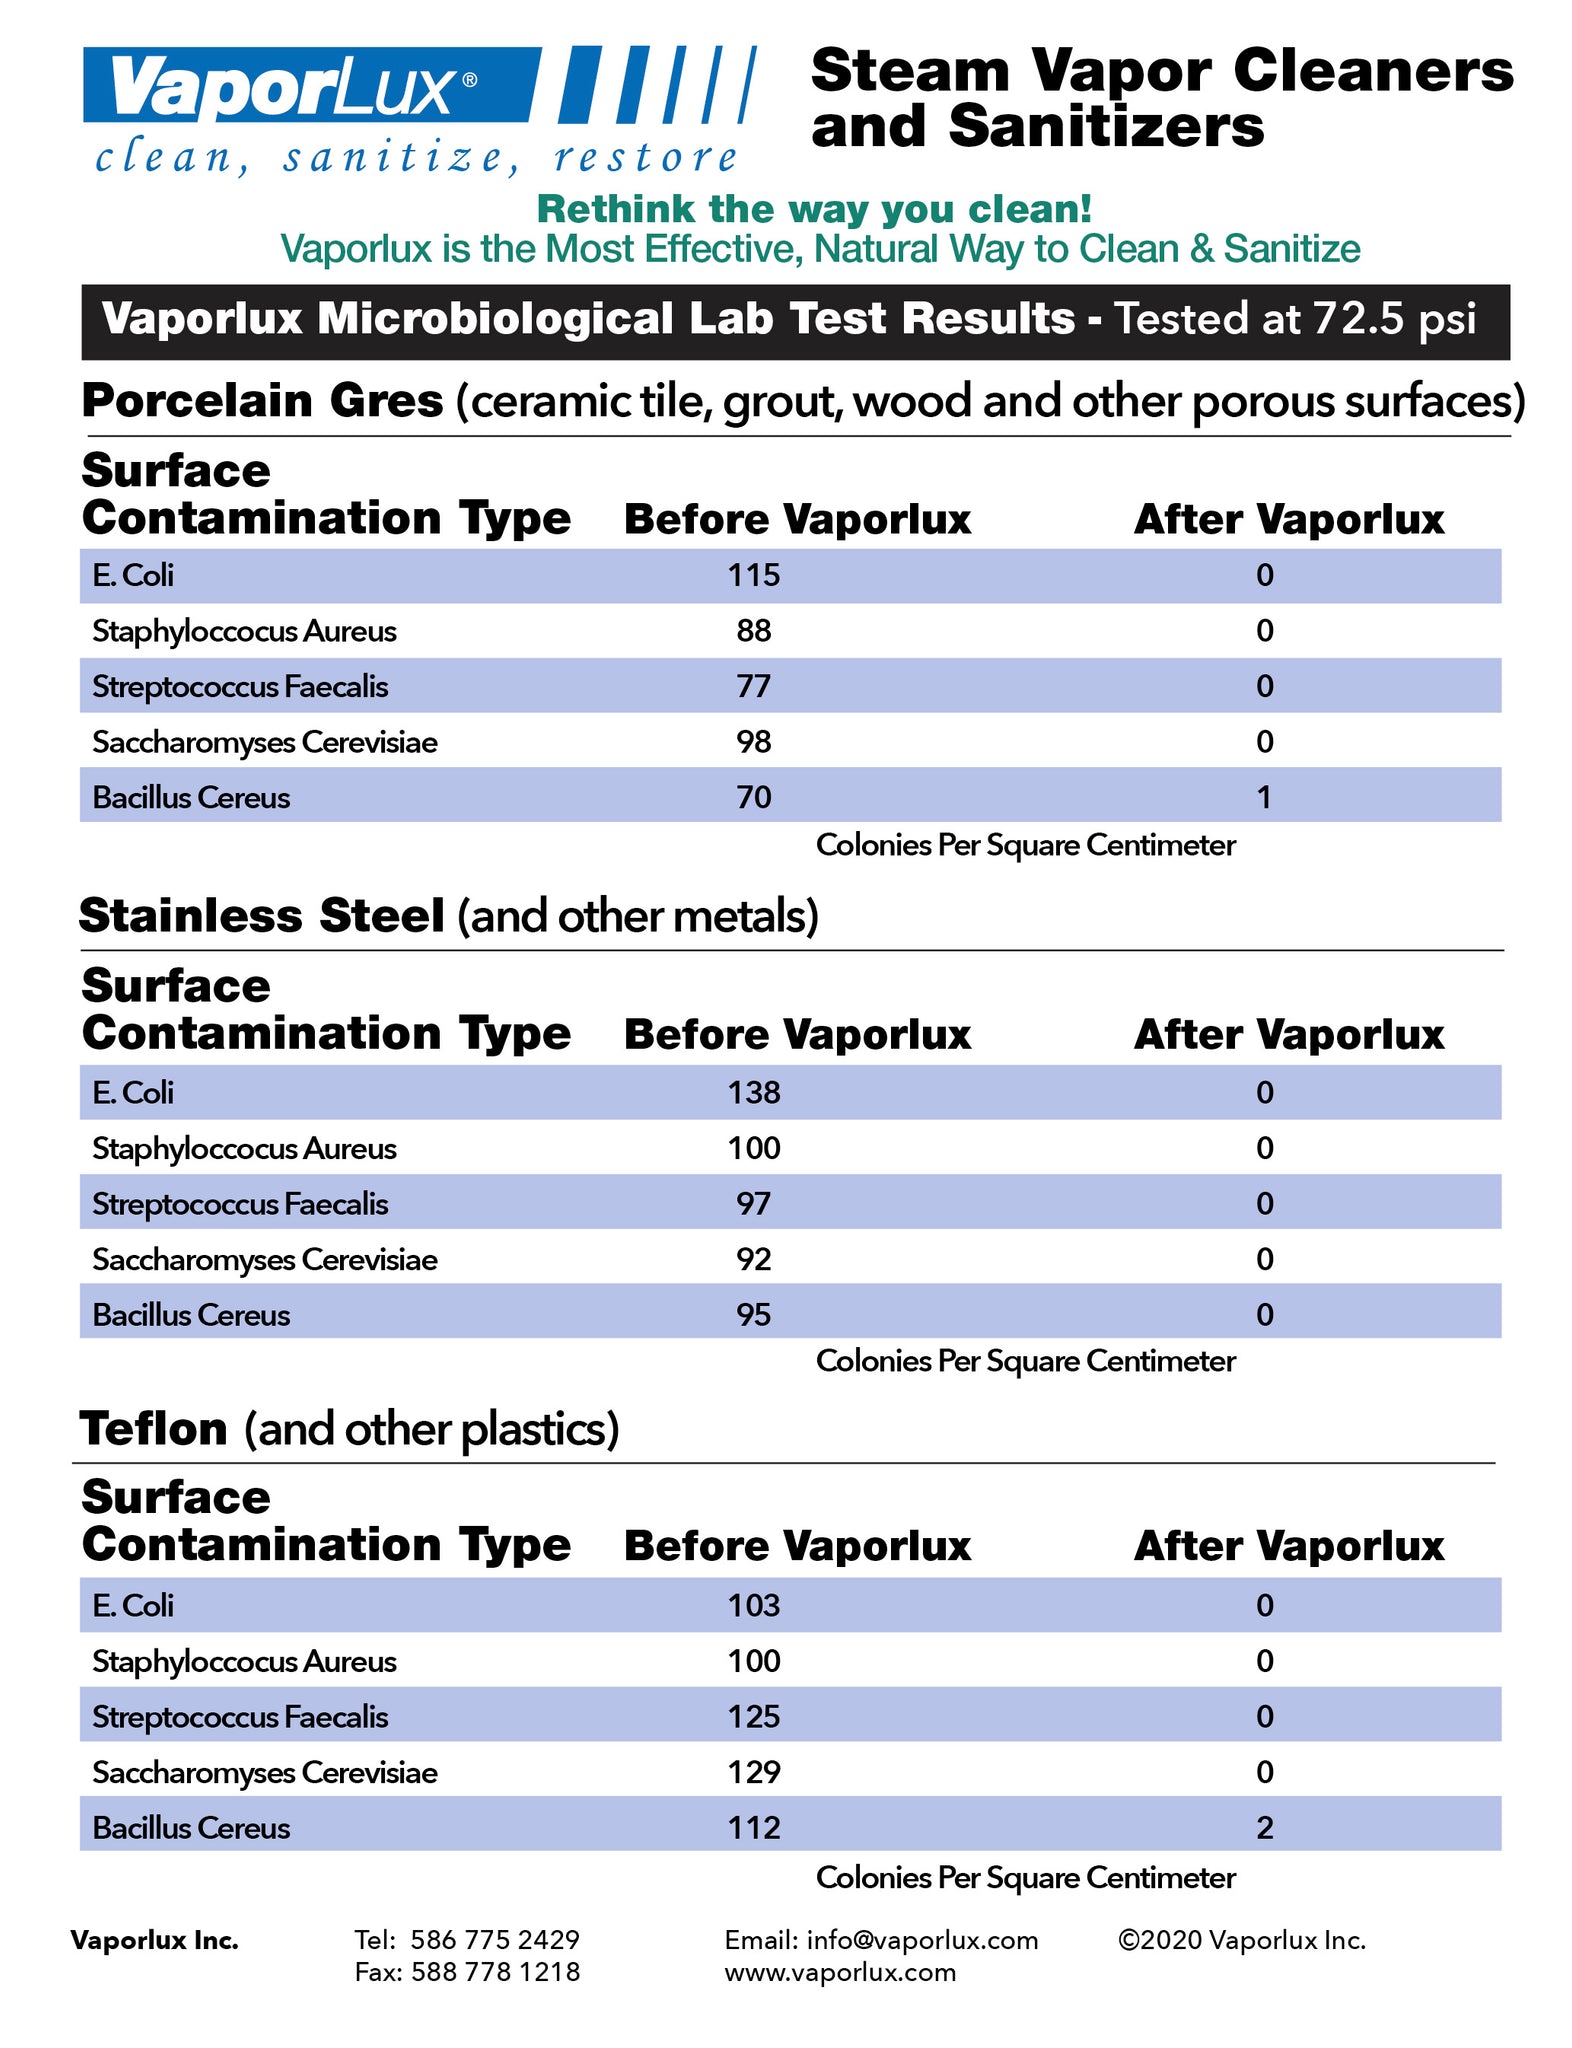 microbiological Lab Results Visual